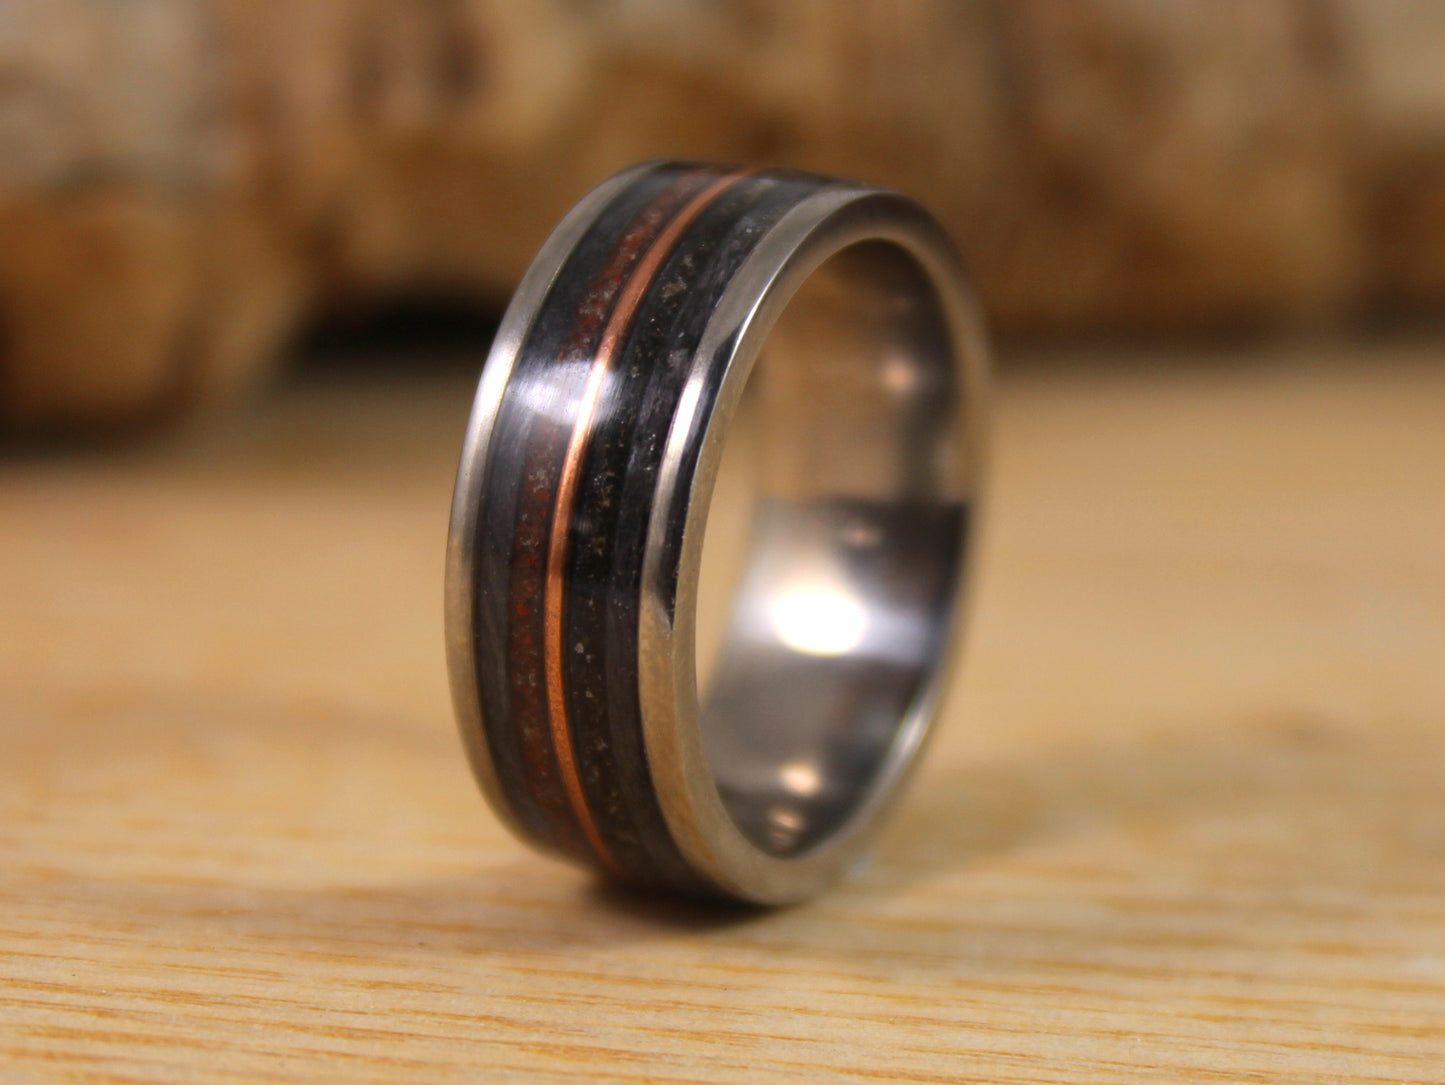 Steel Ring with Dinosaur Bone, Tektite Meteorite, Grey Maple and a Copper